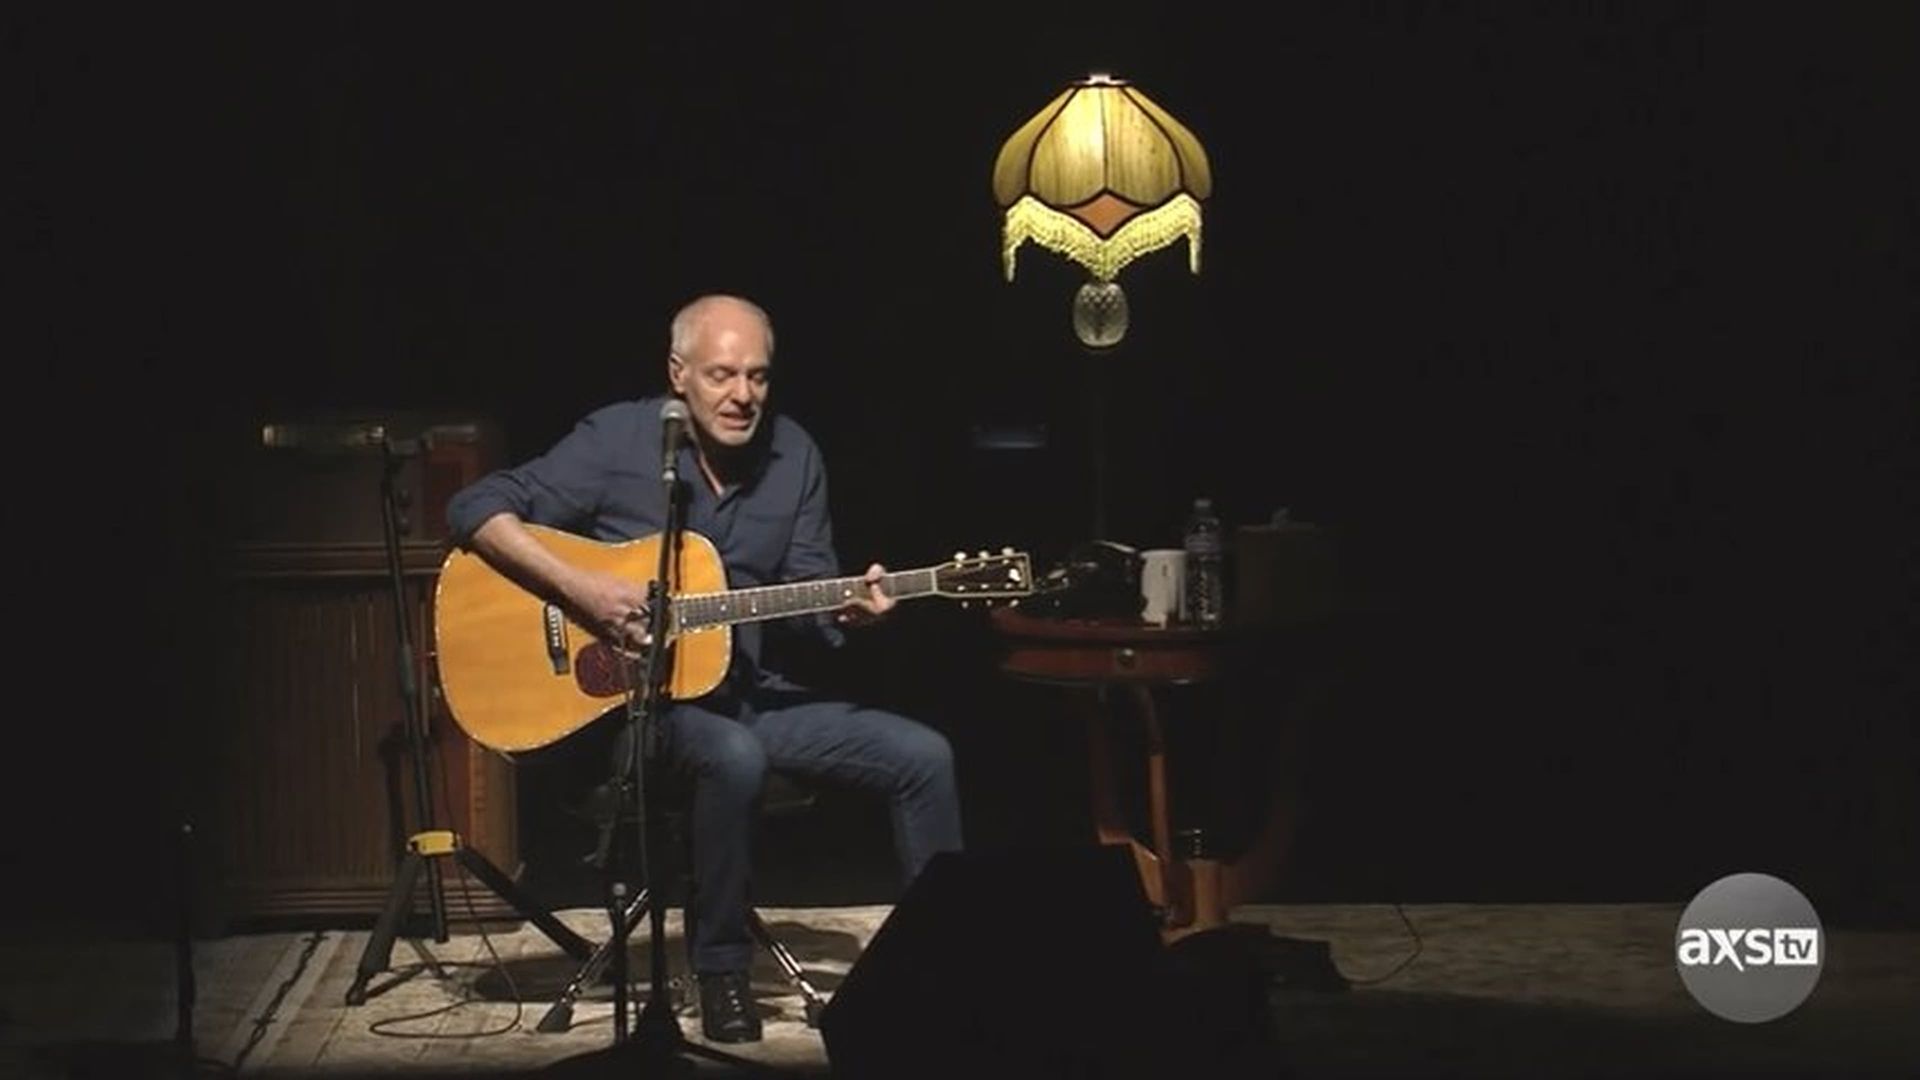 Peter Frampton Raw: An Acoustic Show background